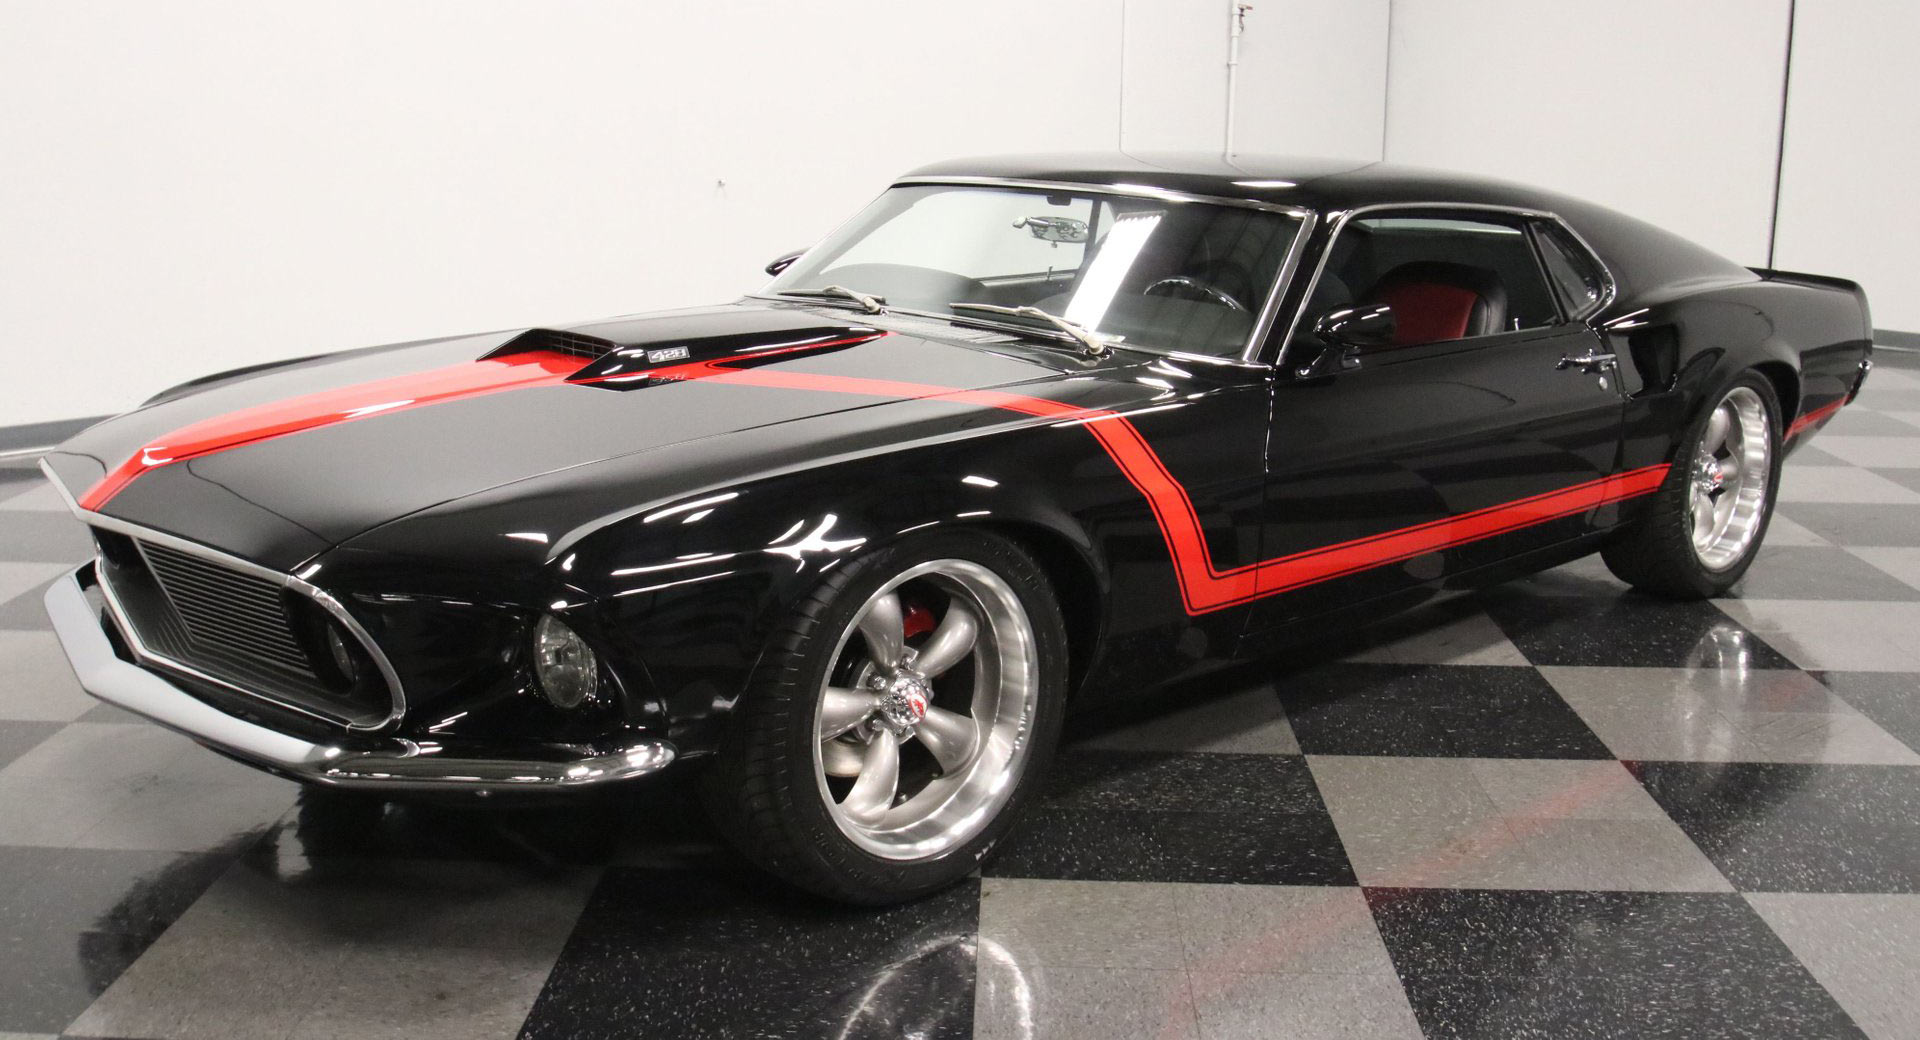 Notice Anything Different About This '69 Ford Mustang Fastback? | Carscoops